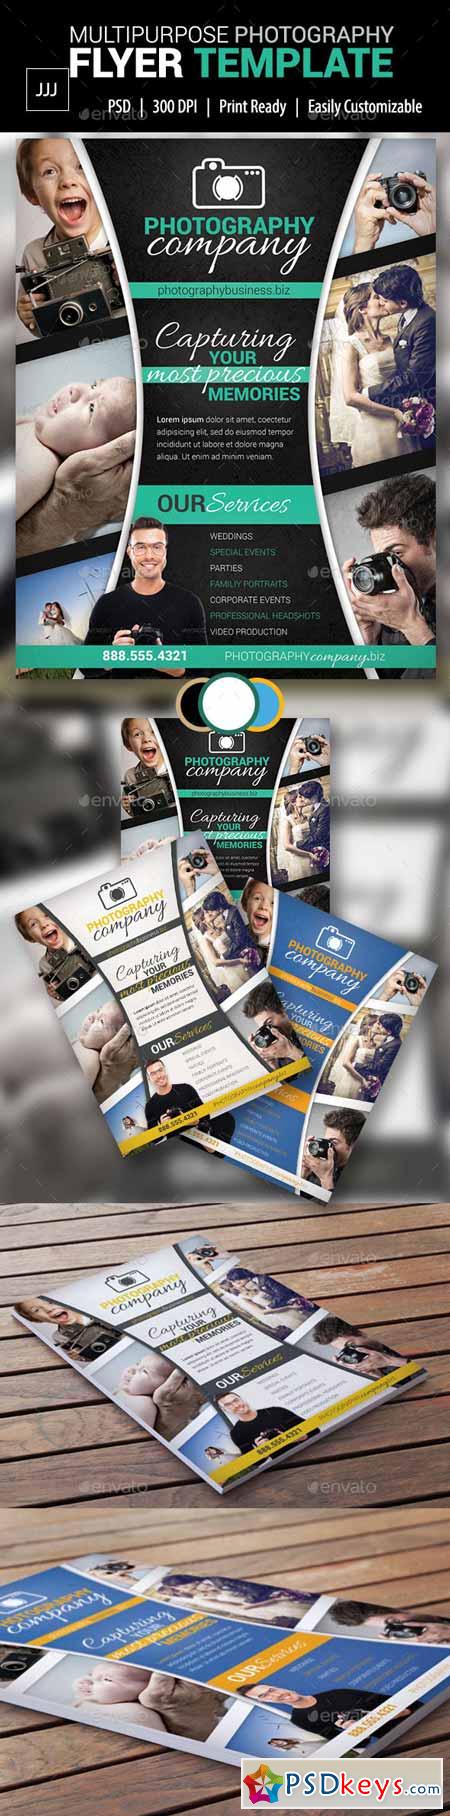 Photography Business Flyer 14 10057903